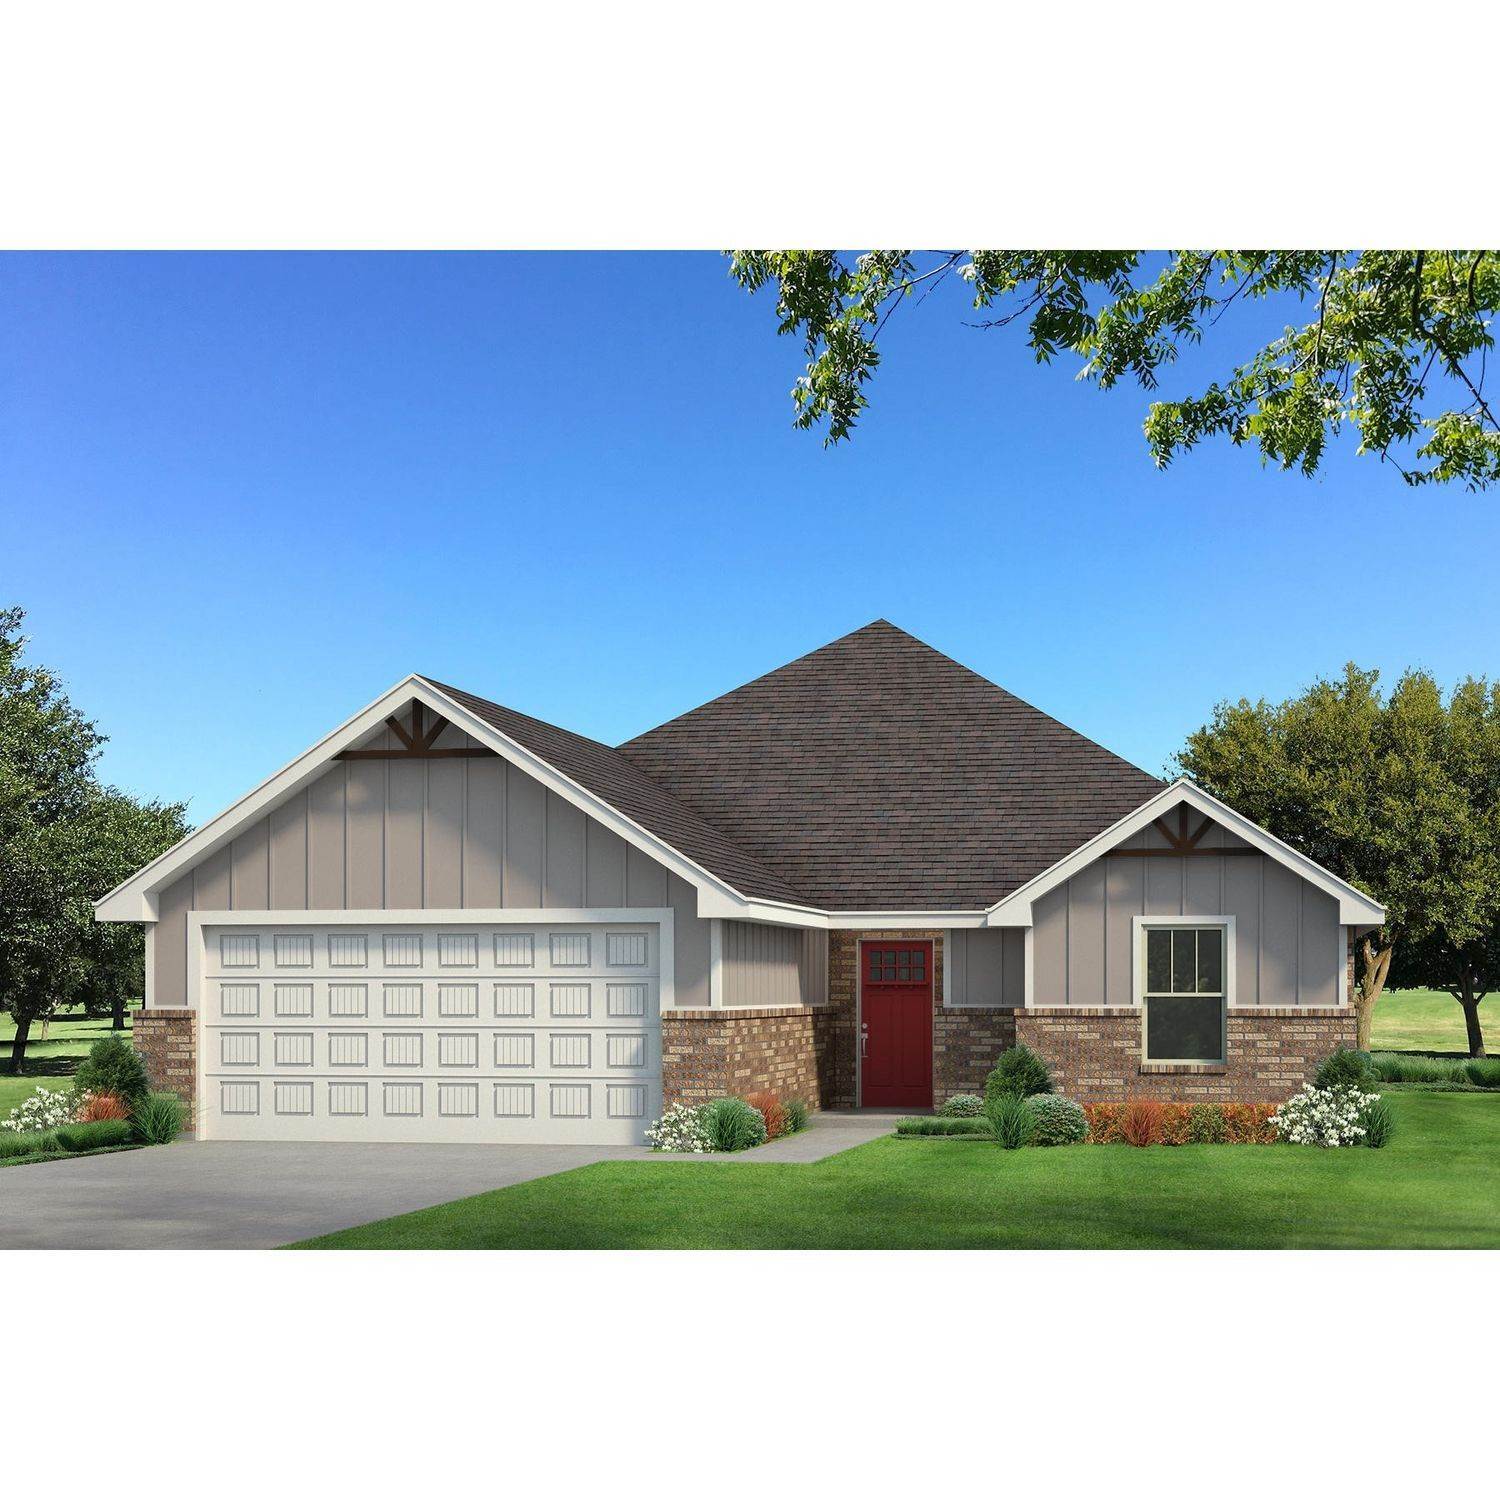 Single Family for Sale at Norman, OK 73072